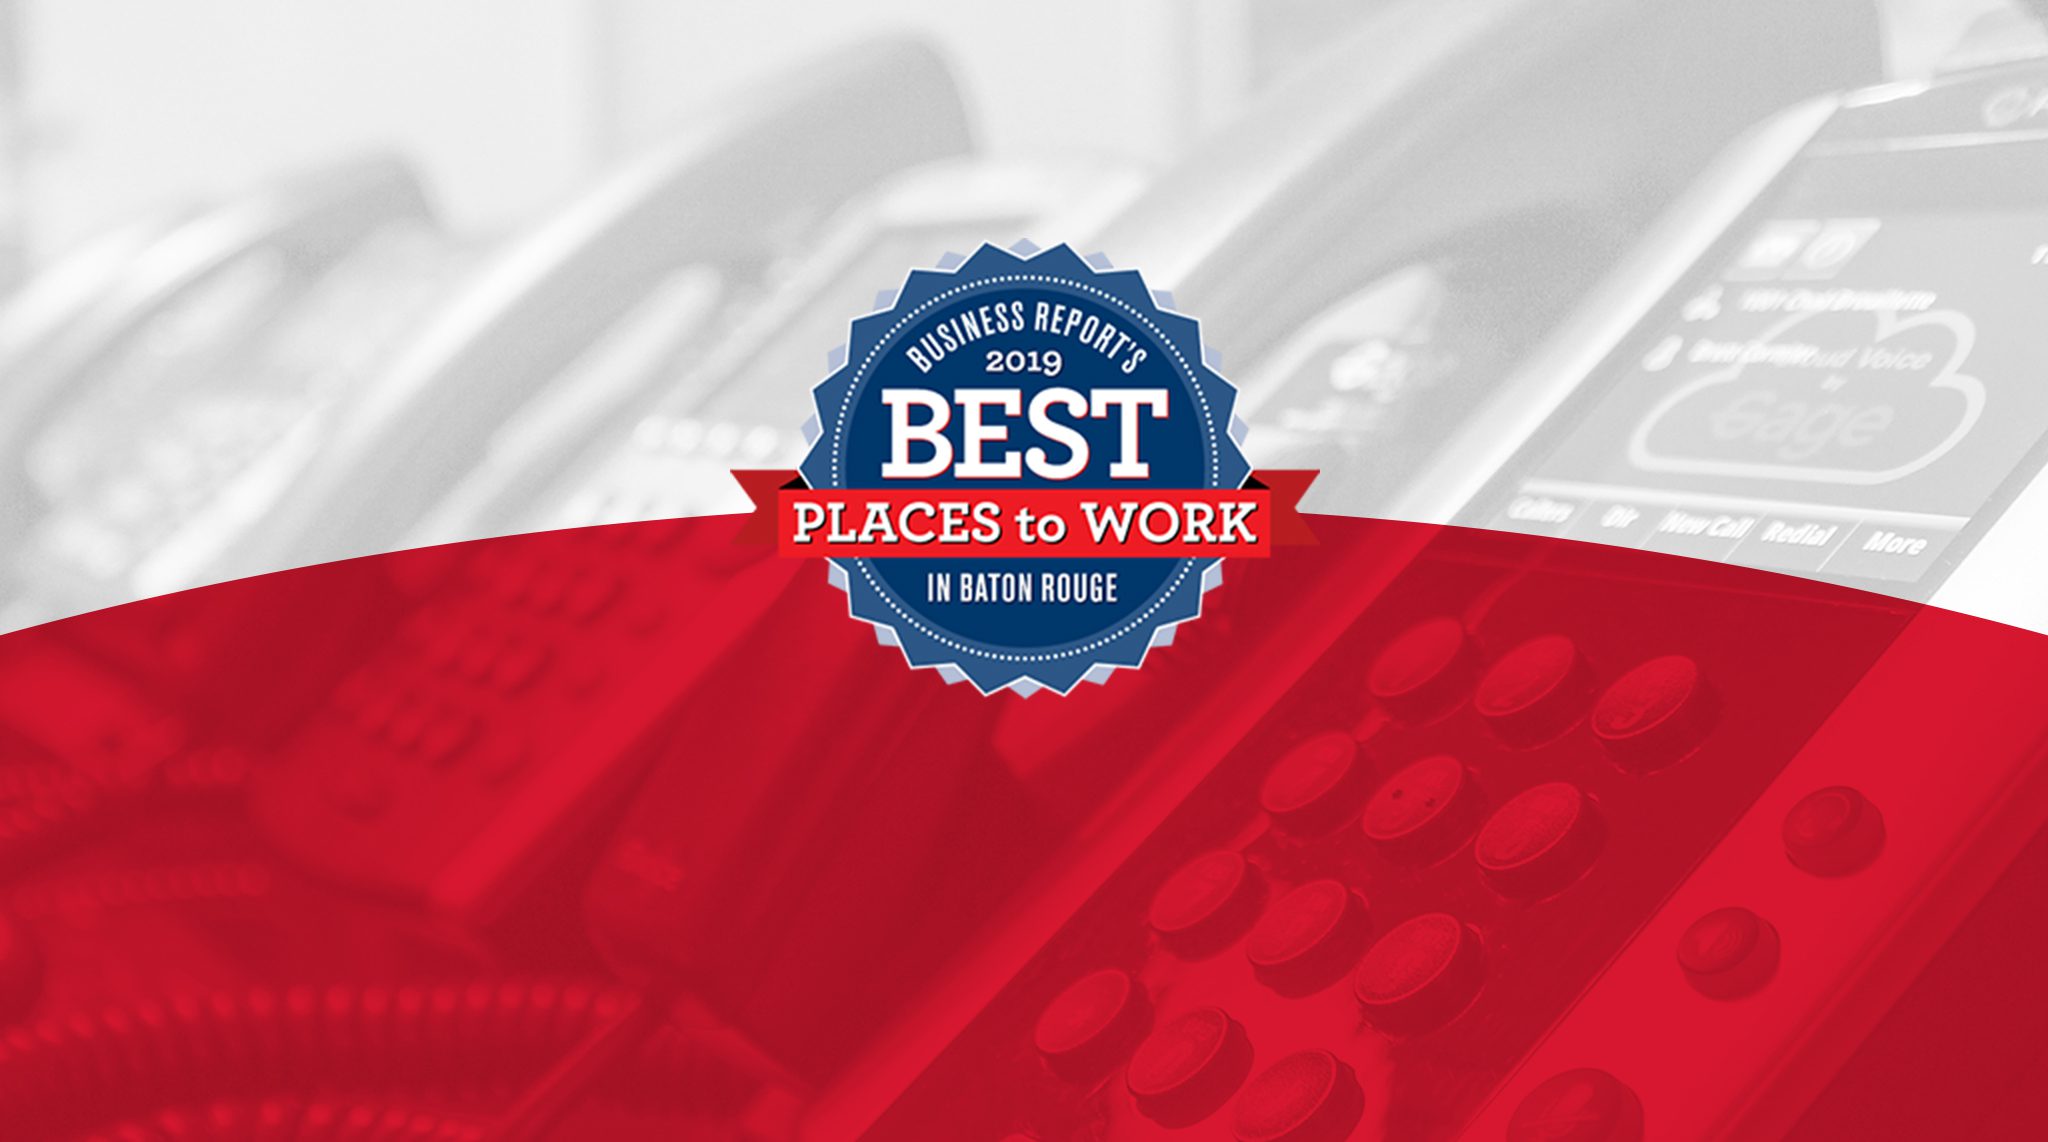 Best Places To Work in Baton Rouge 2019